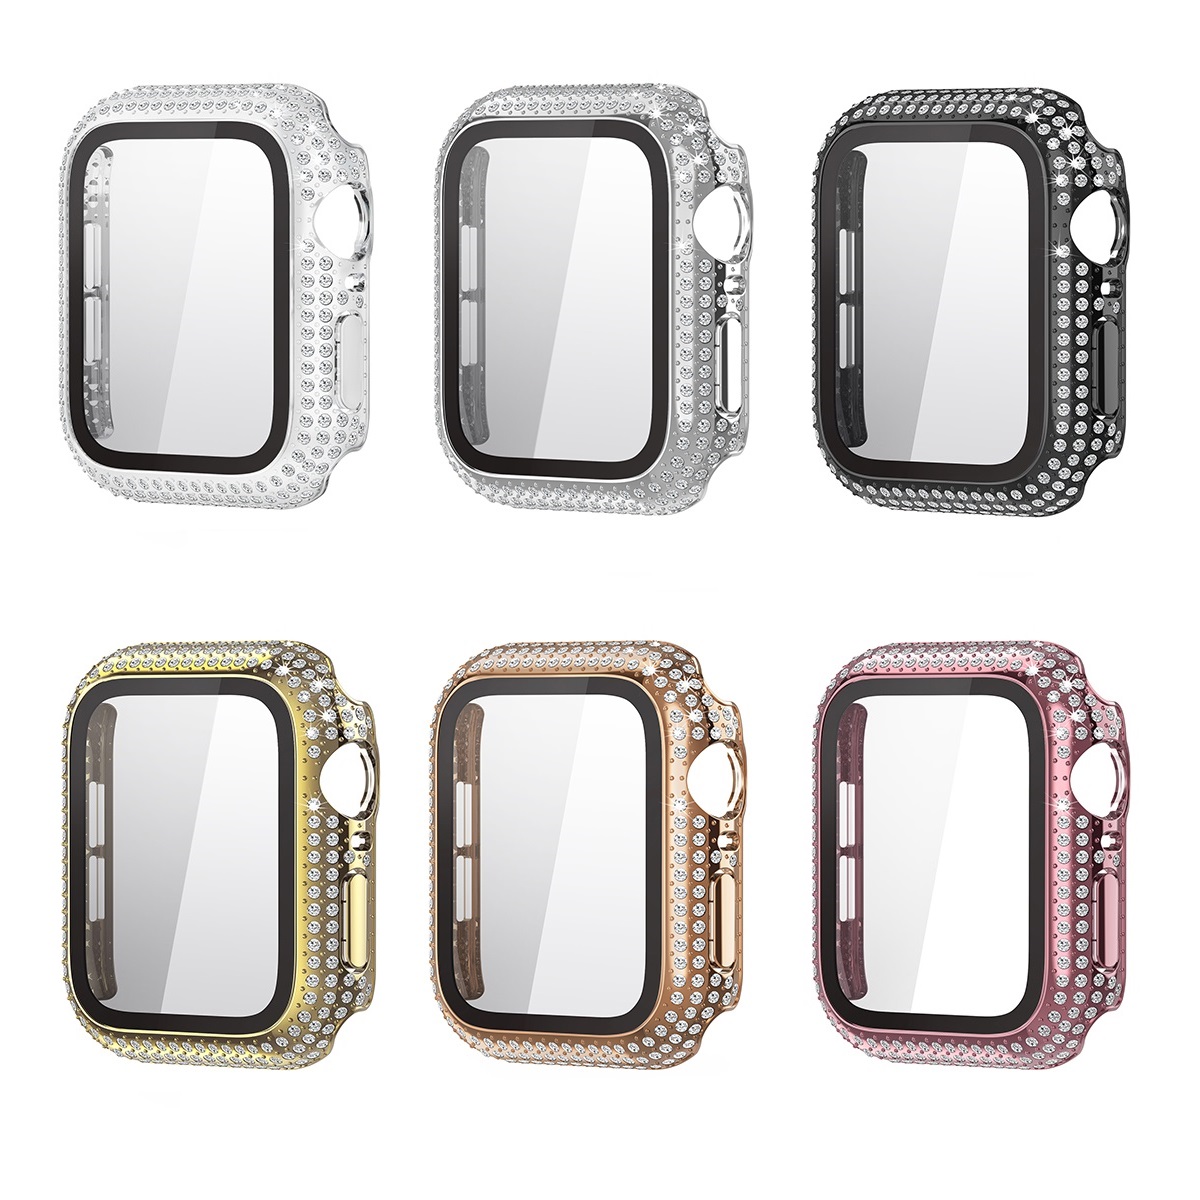 CBWC12 Luxury Bling Rhinestone Diamond Plastic Watch Case For Apple Watch Accessories For iWatch Case Cover